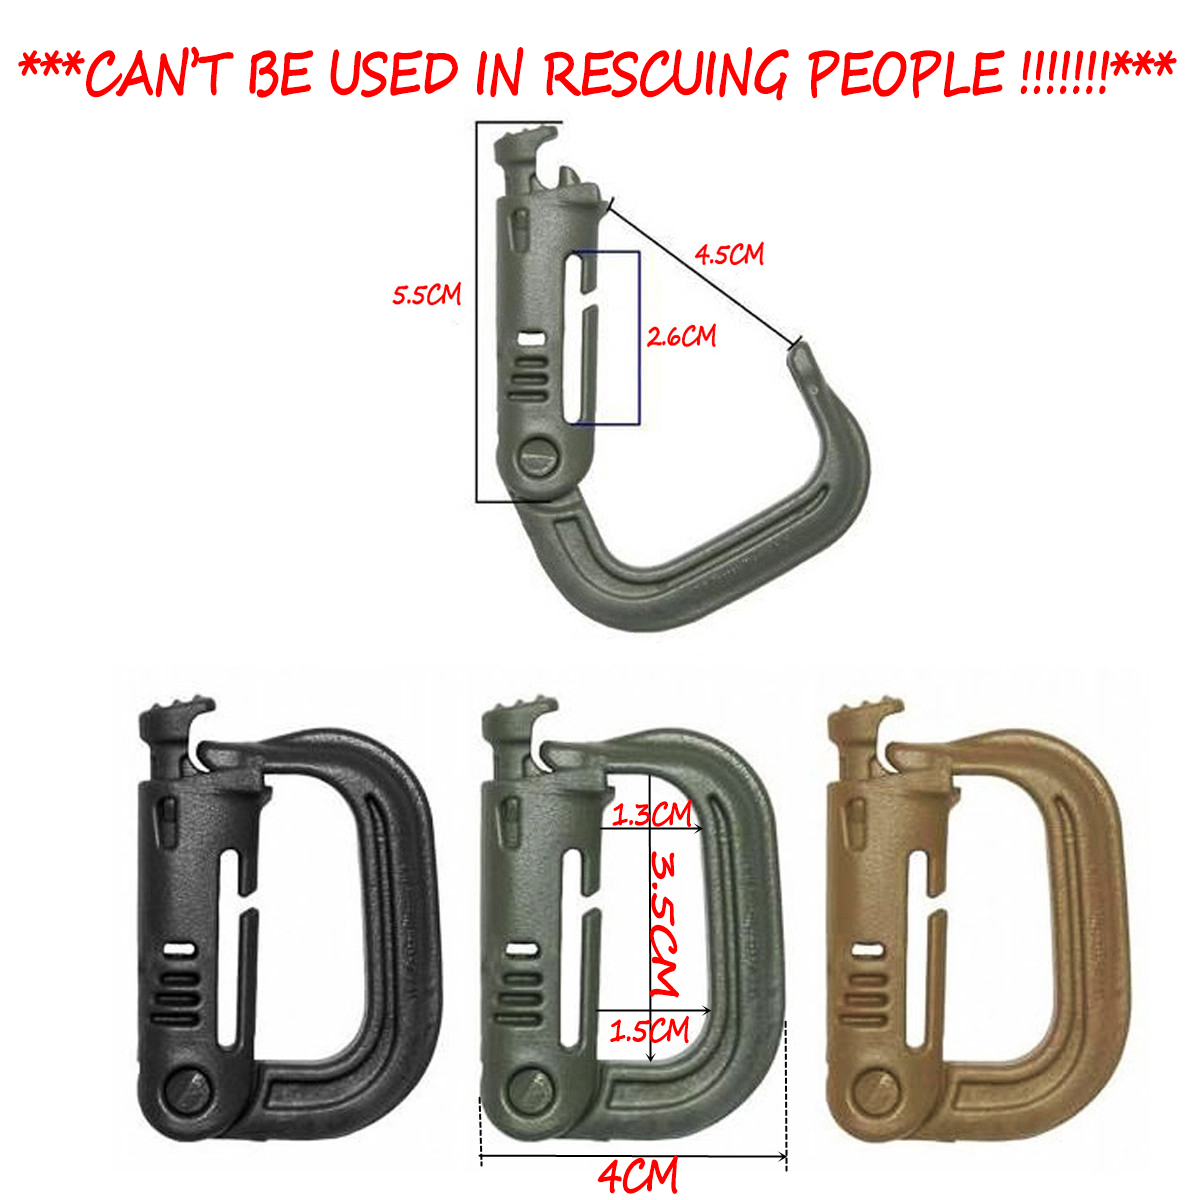 CAMTOA-Max-Load-90kg-D-Ring-Hook-Mountaineering-Buckle-Key-Chain-Outdoor-Climbing-Carabiner-Tactical-1885104-3